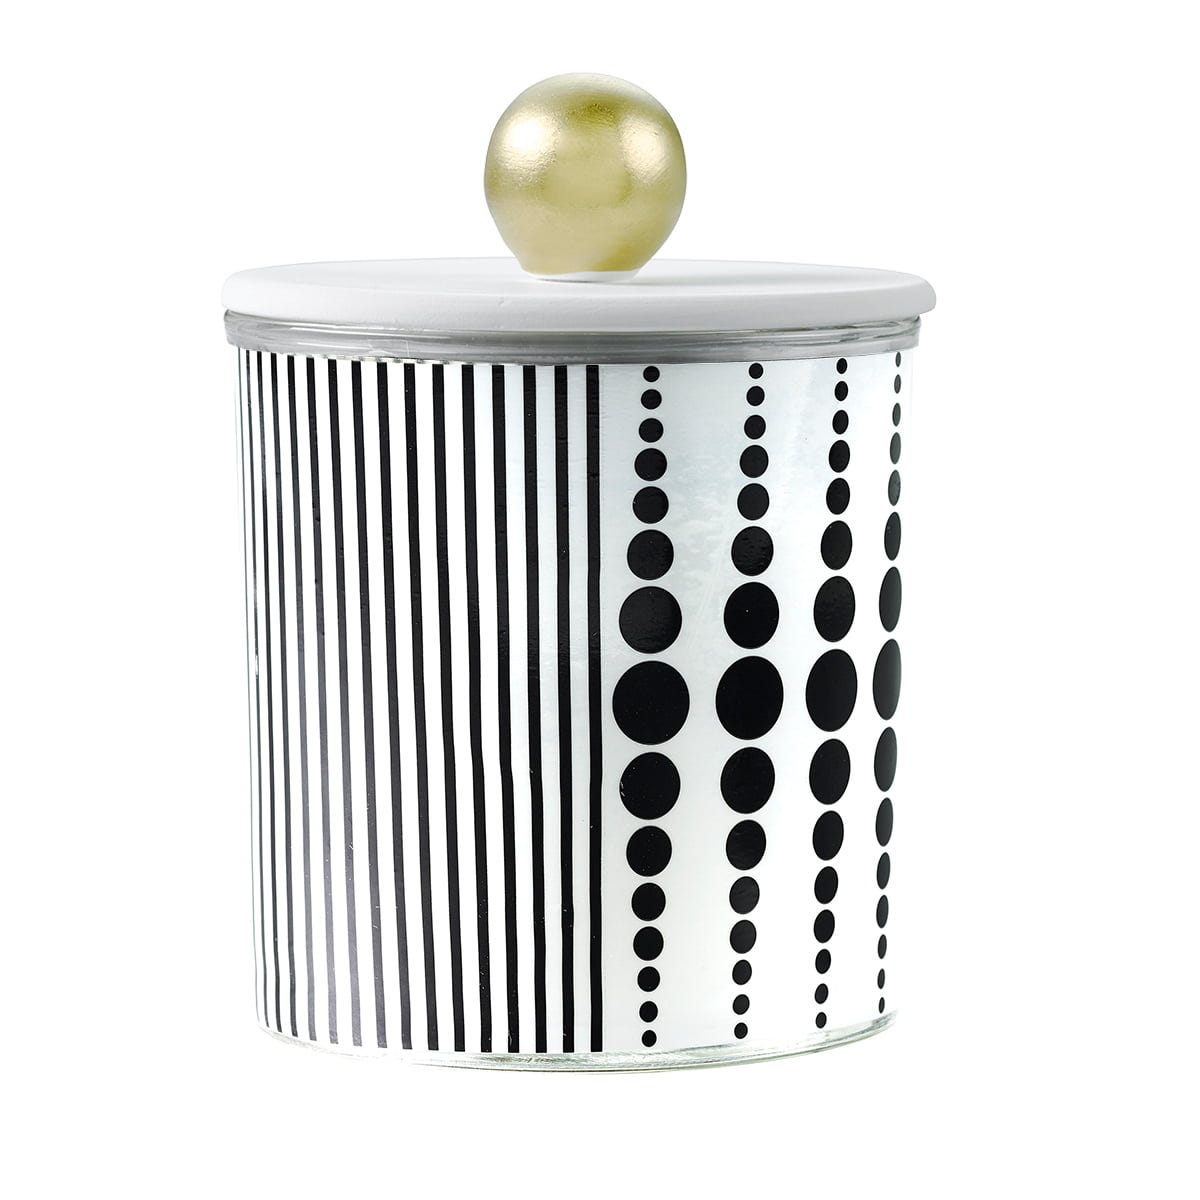 Iced Snowberries™ Monochrome Jar Candle - PartyLite US